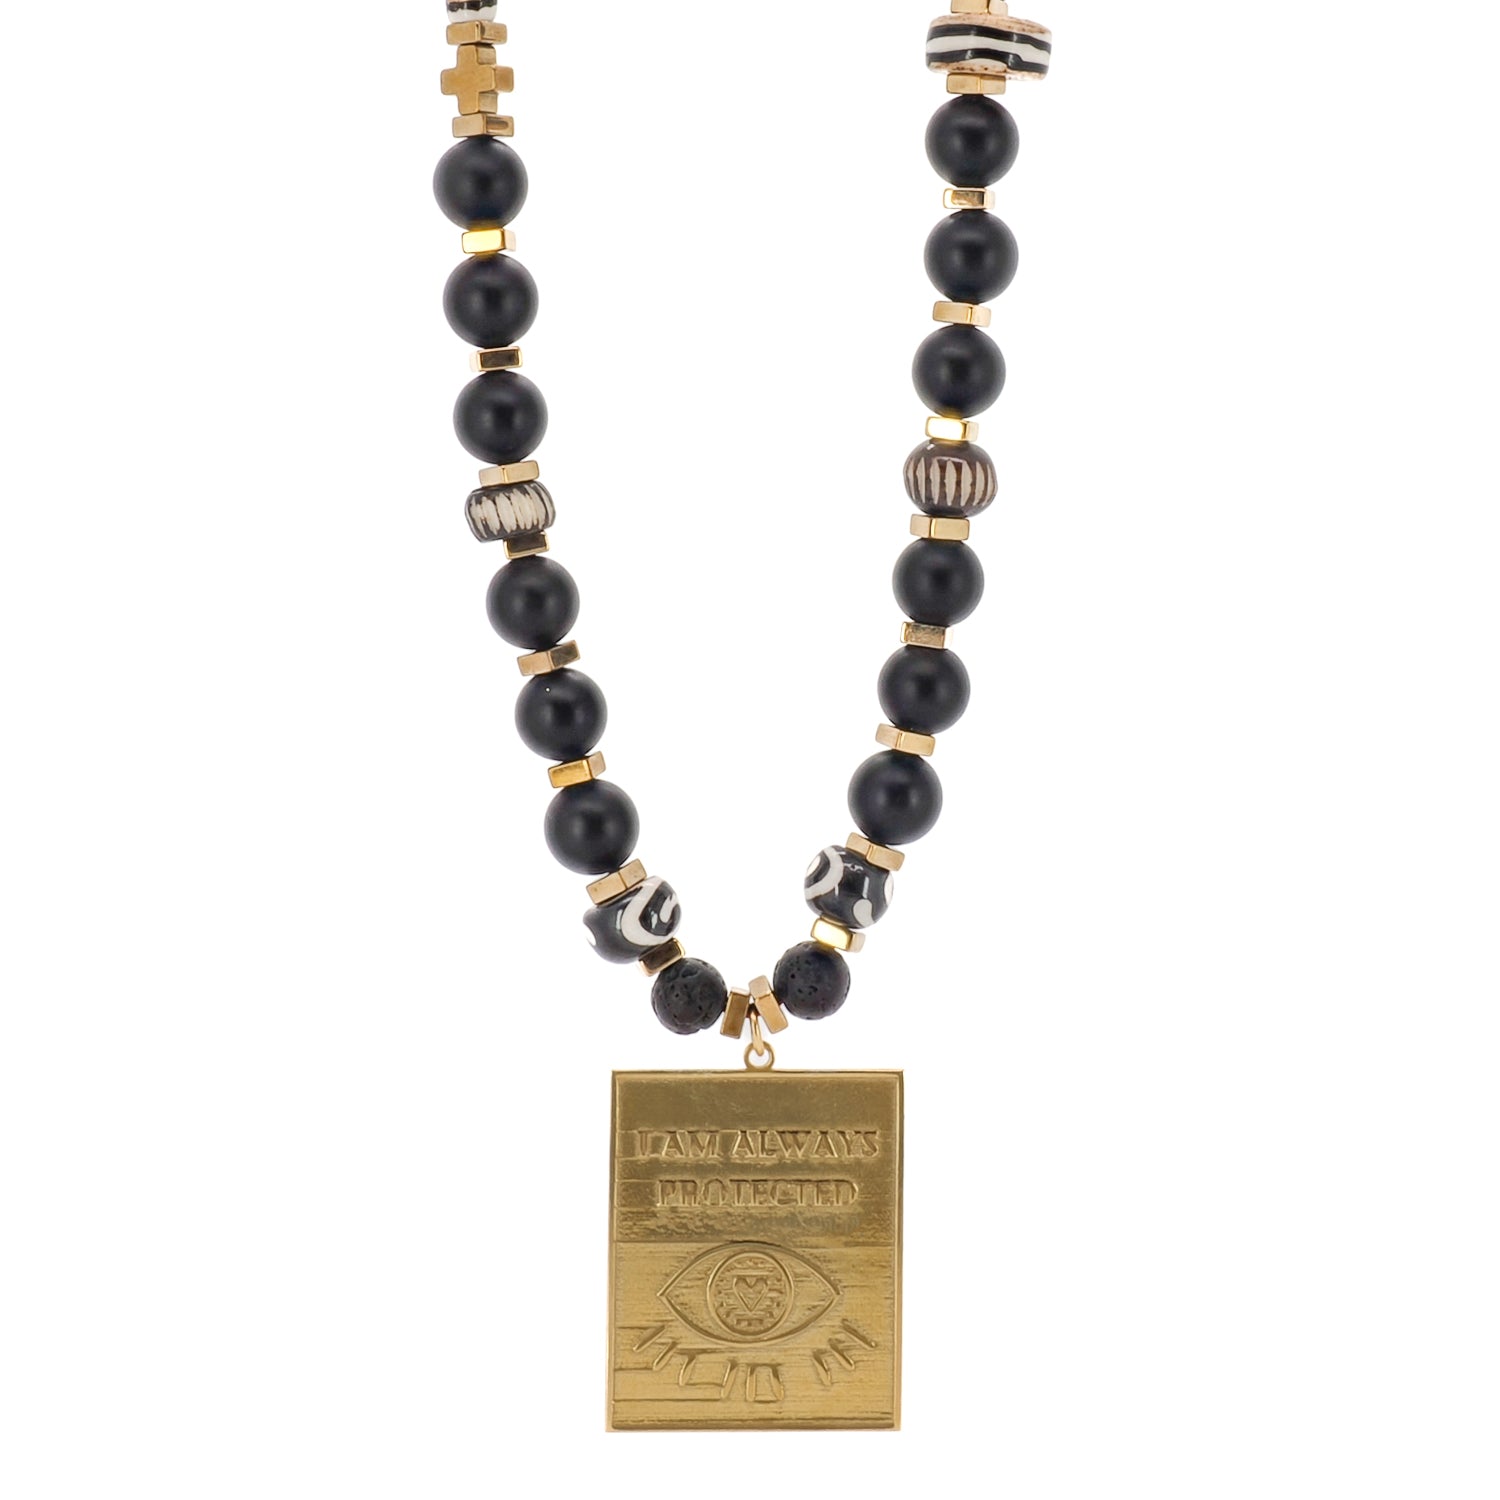 The I Am Always Protected Onyx Necklace, featuring black onyx beads and a gold-plated evil eye pendant.